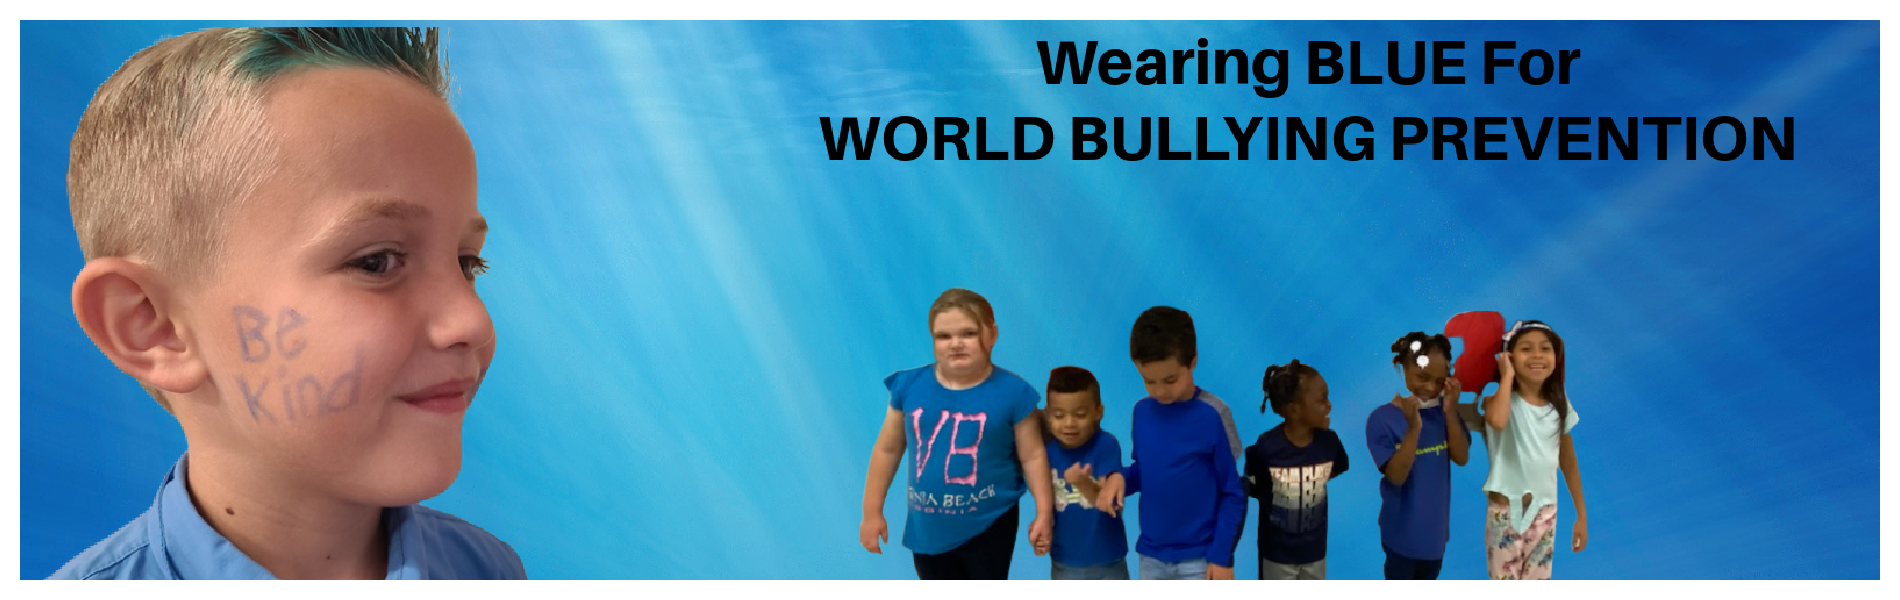 Wearing blue for bullying